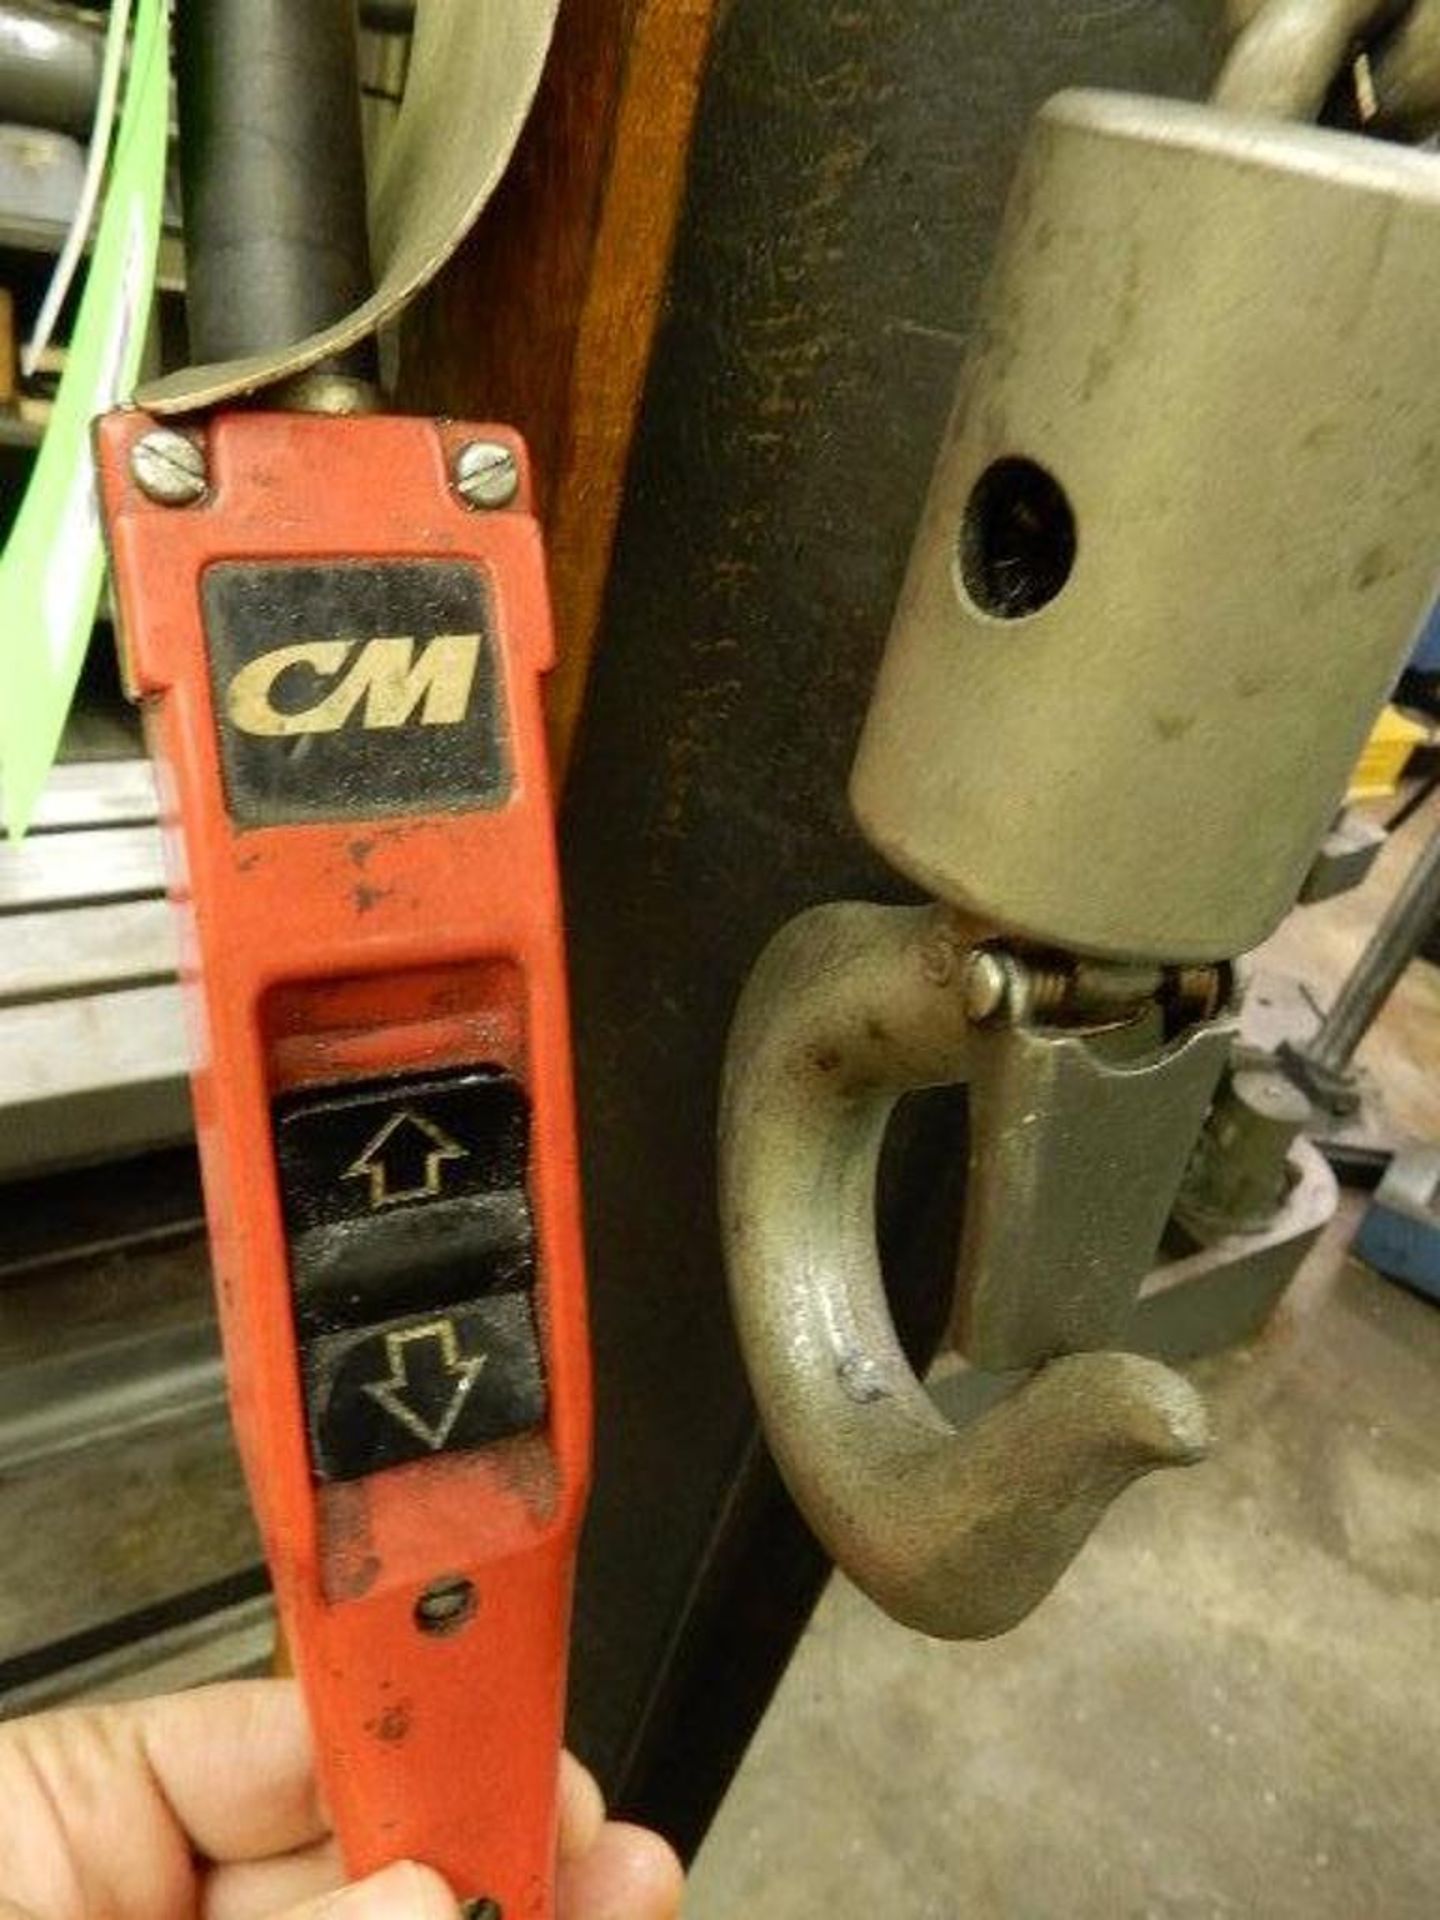 CM Loadstar Electric Chain Hoist with Tolley - Image 4 of 4